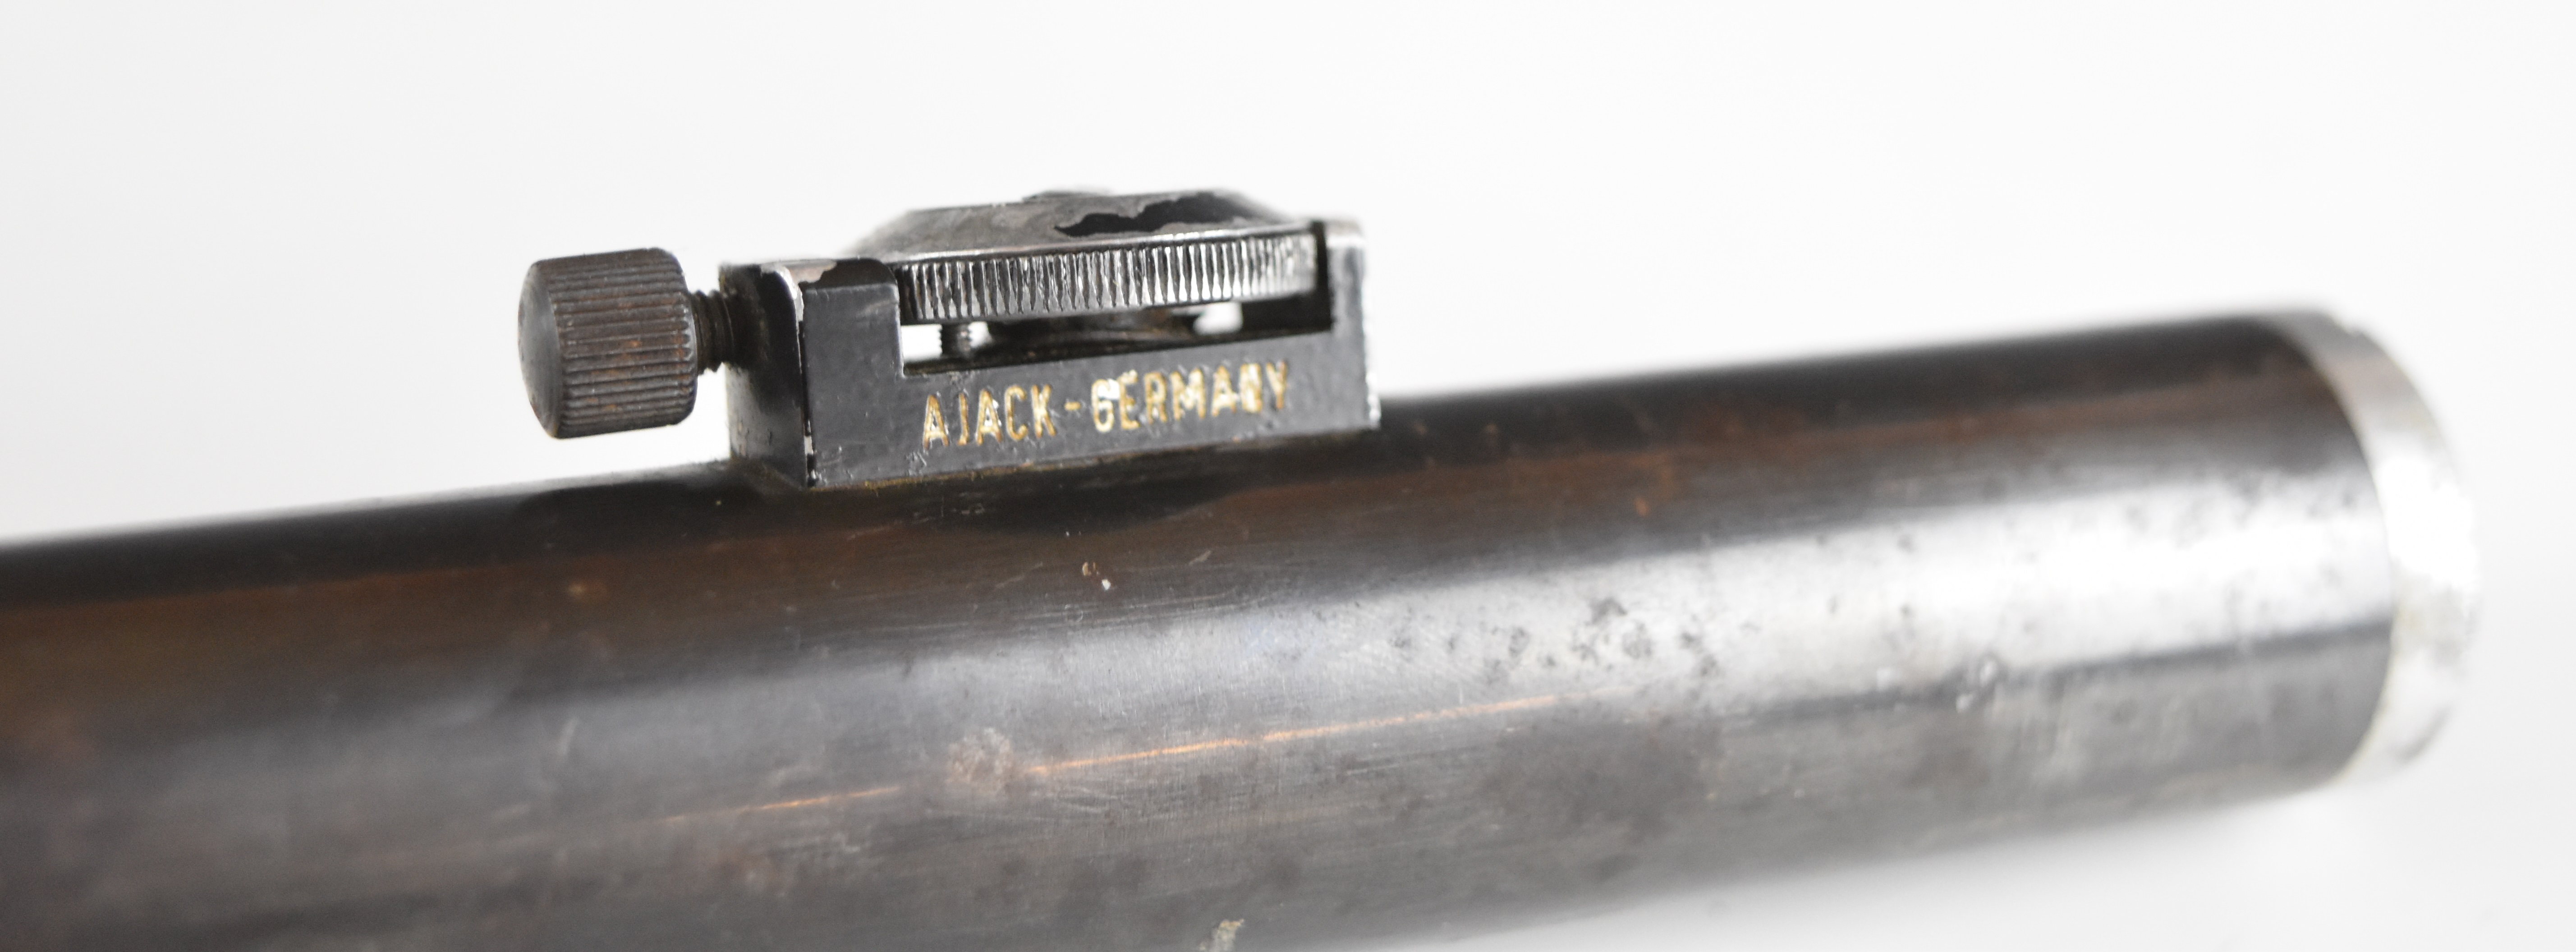 Ajax 2.5x70 German sniper rifle scope marked '1214' and 'Ajax Germany', in leather case - Image 5 of 6